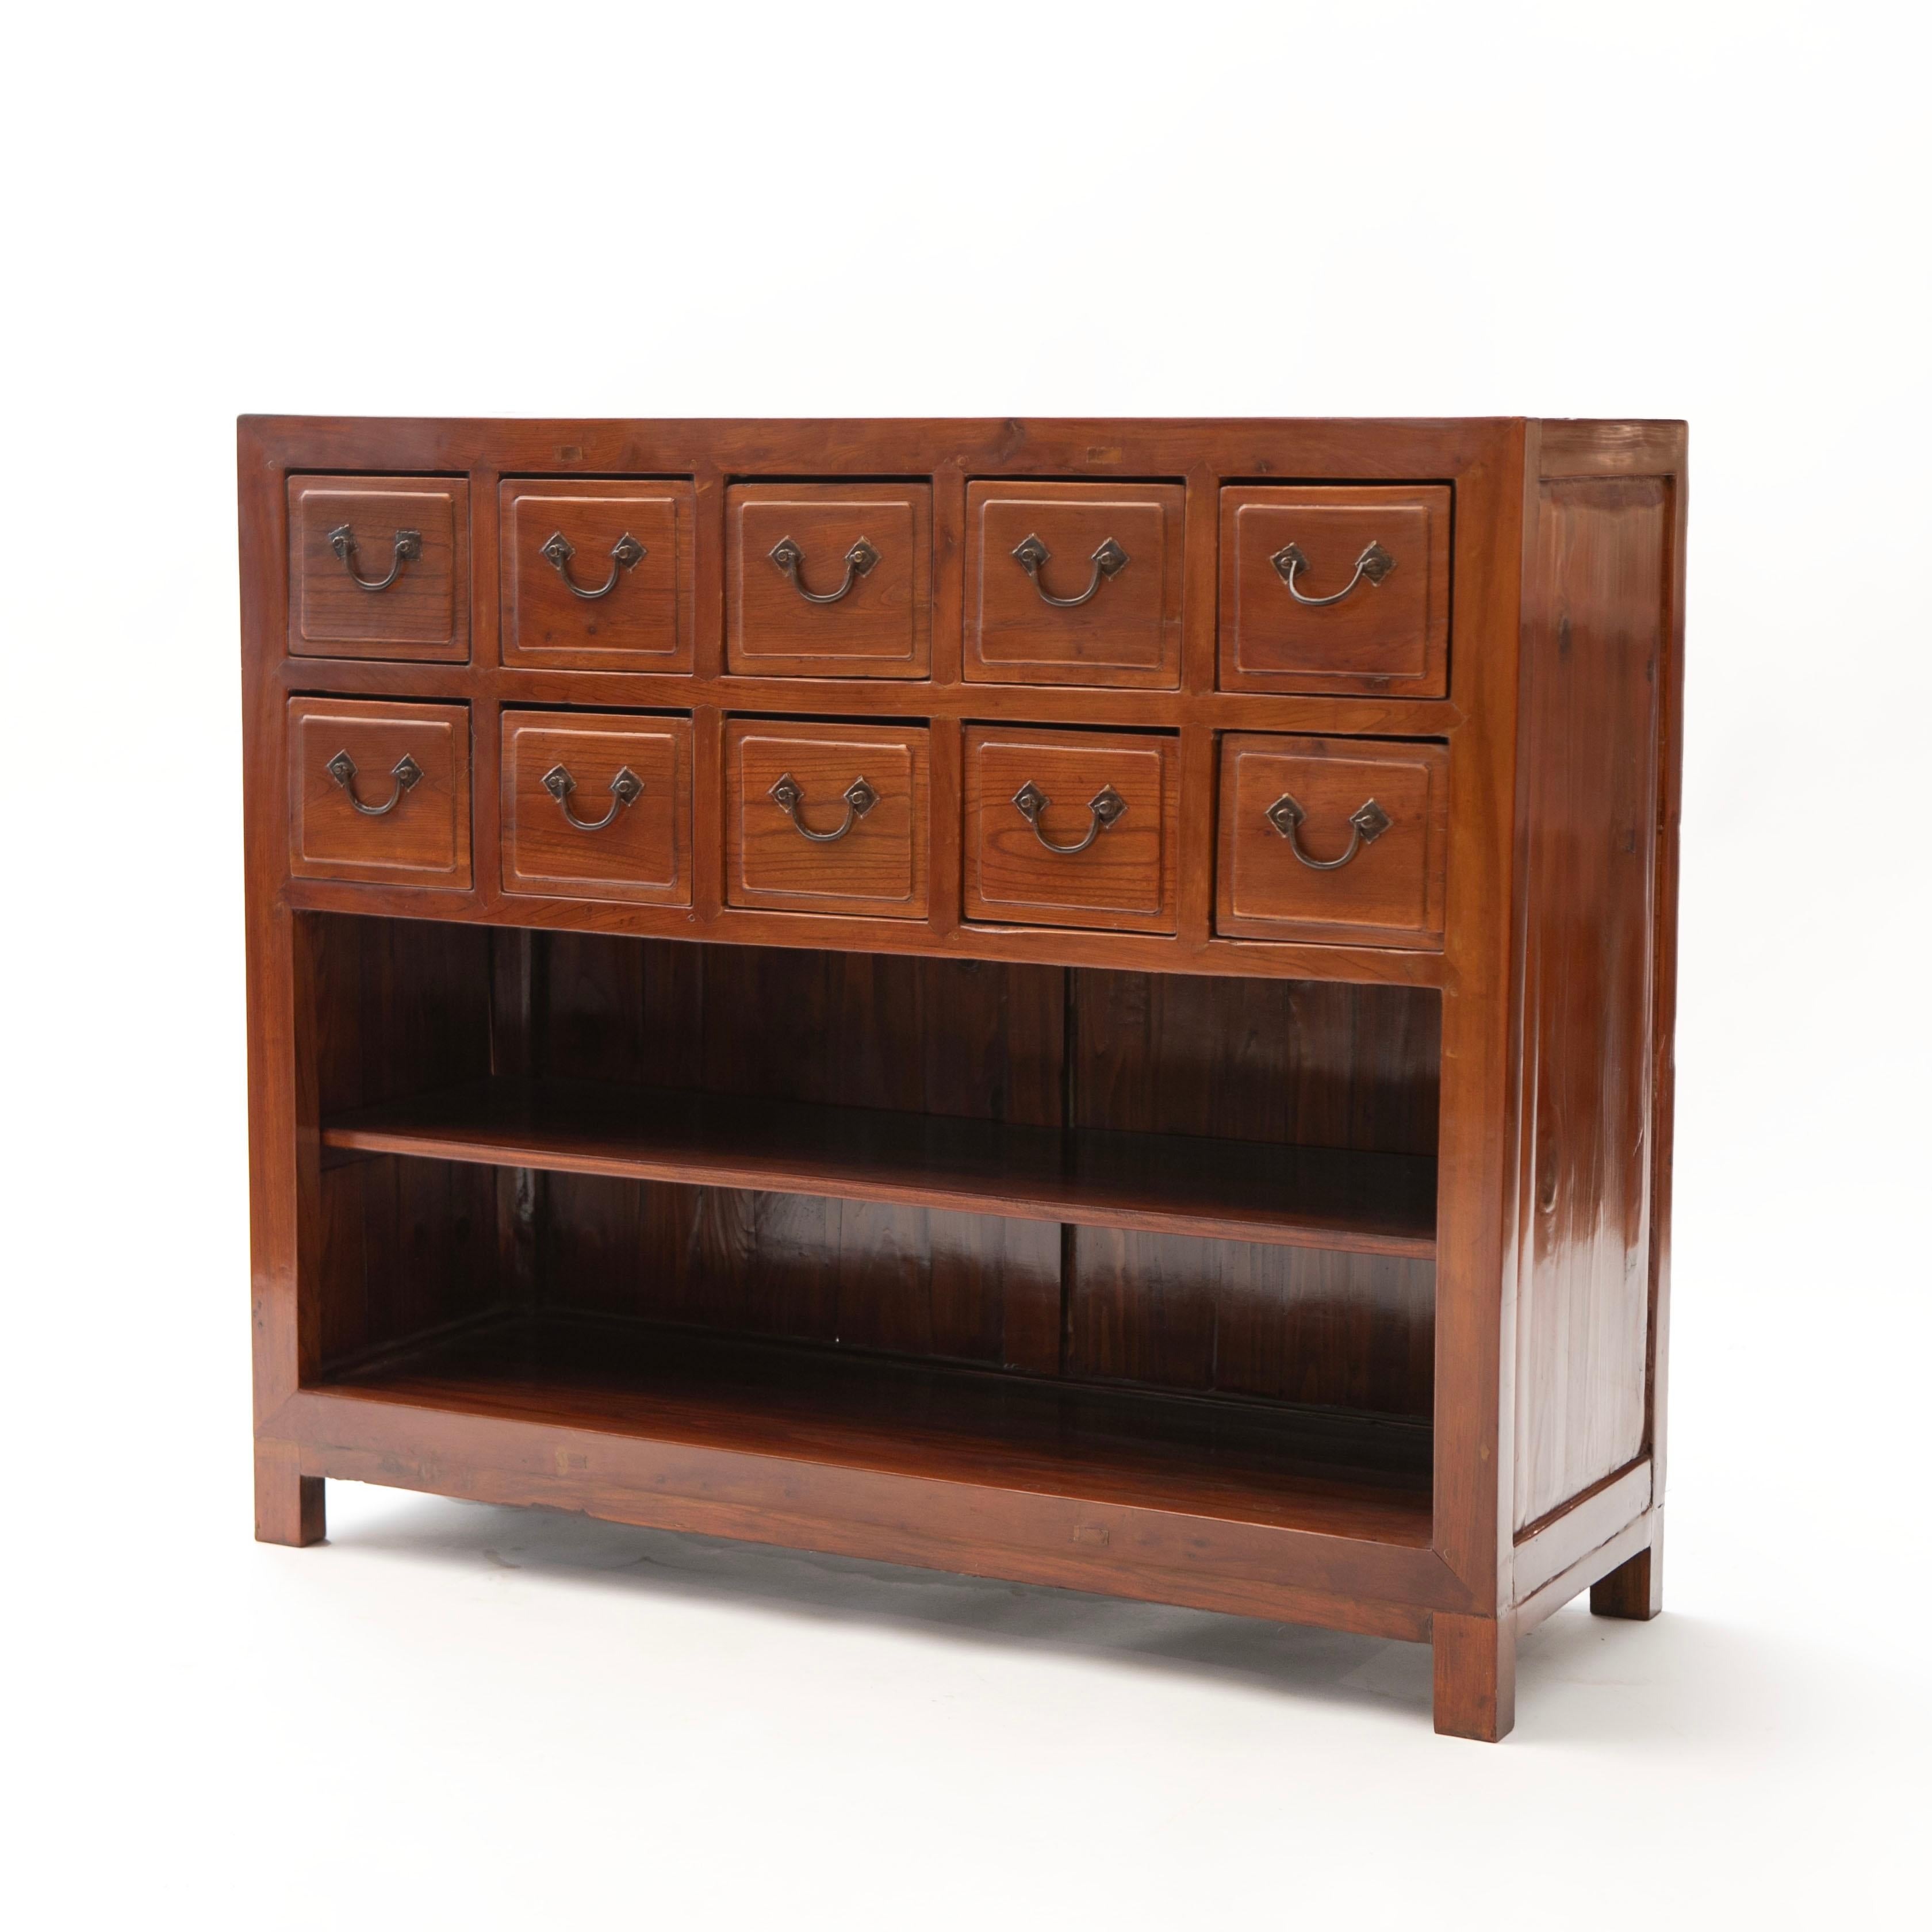 A Chinese Qing Dynasty period late 19th century apothecary merchant's chest in Southern elm, also called Jumu wood.
Originally used by a Chinese pharmacy to organize and store herbal medicines.
This chest features 10 drawers (2x5) in the upper